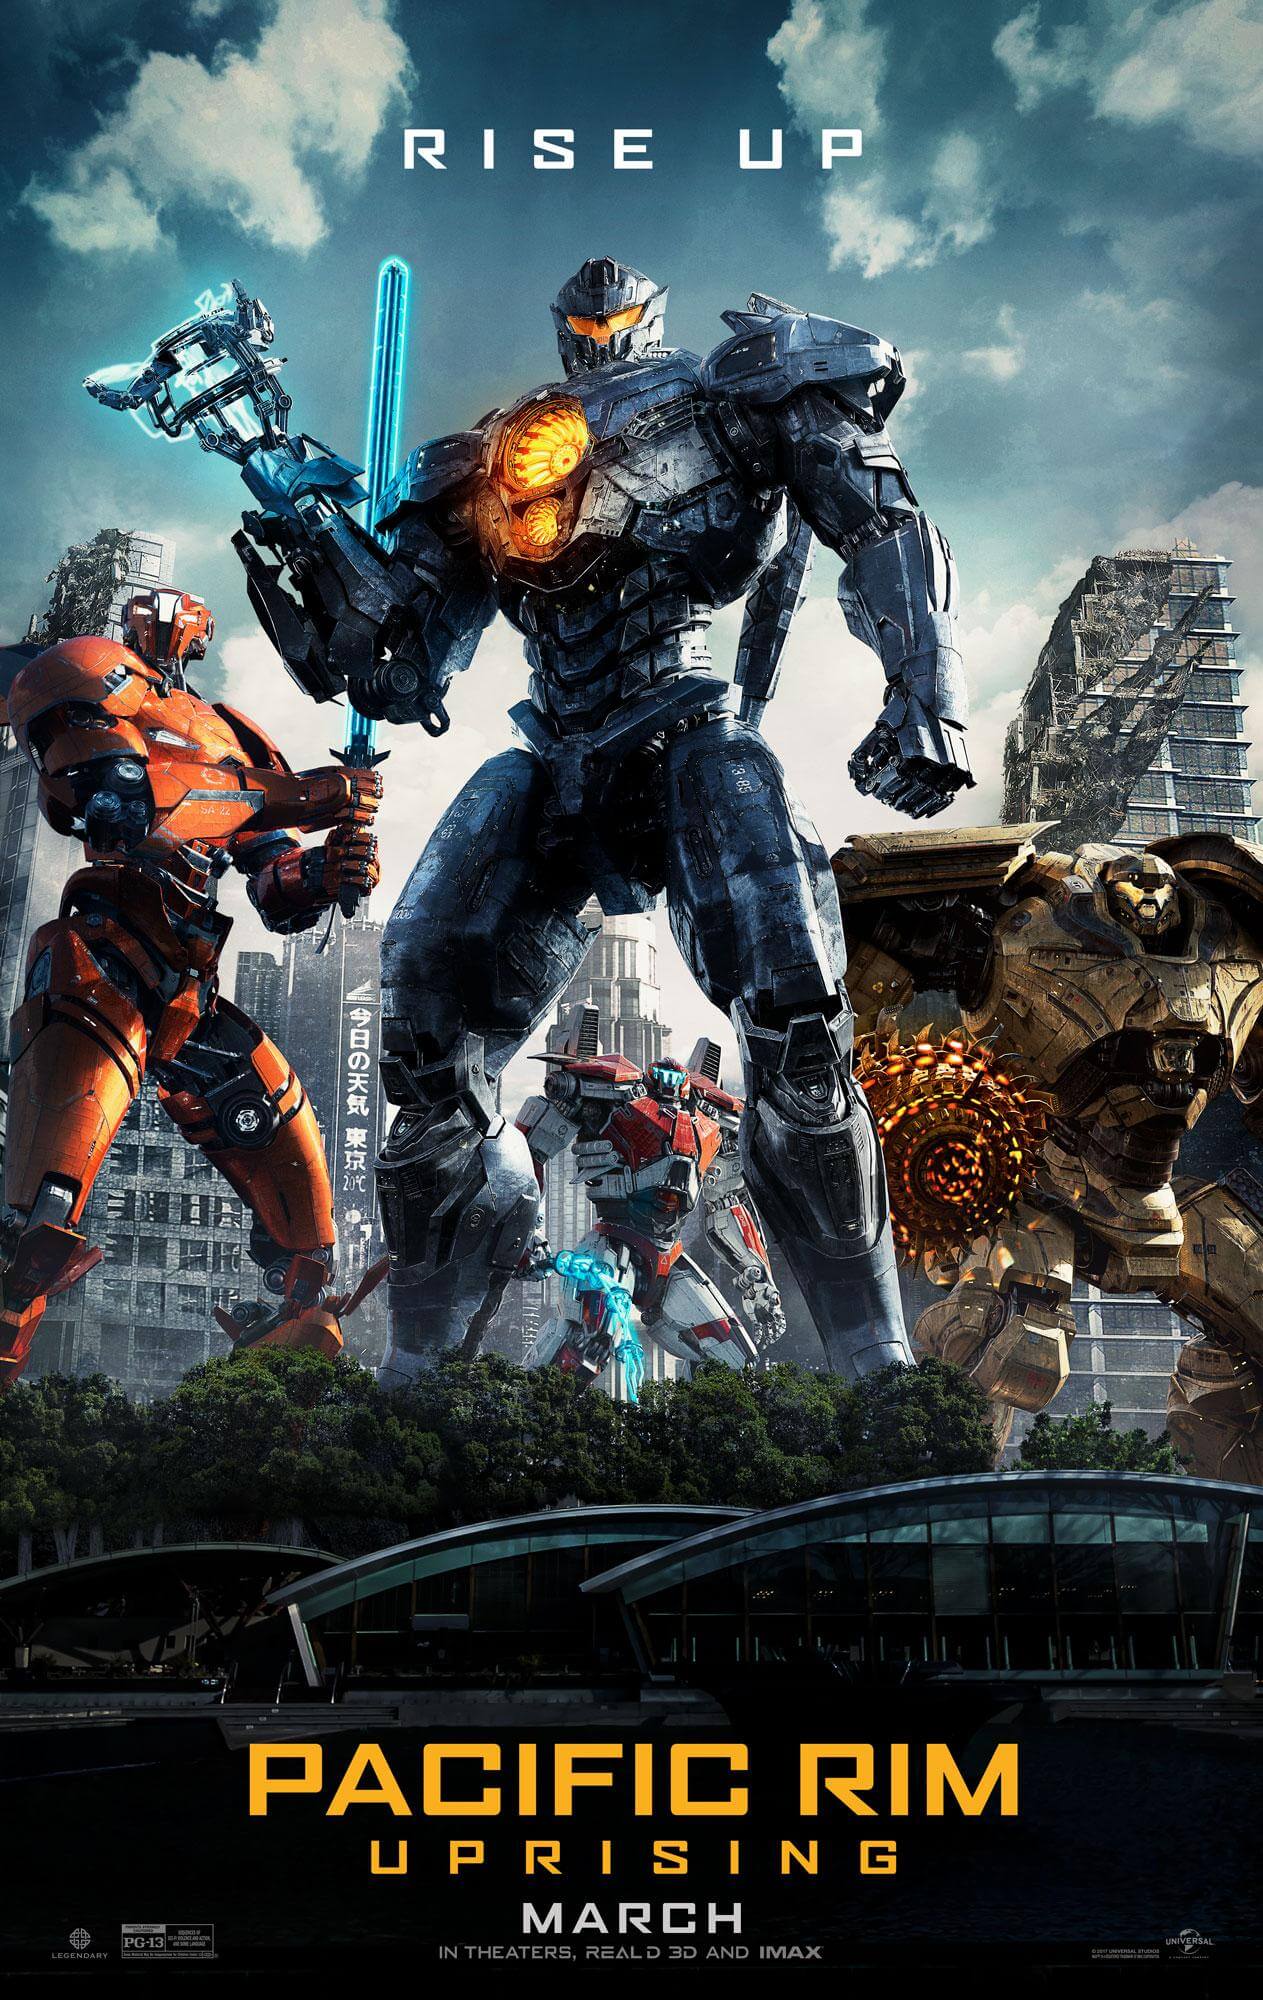 Pacific Rim Uprising Poster. In Theaters Now